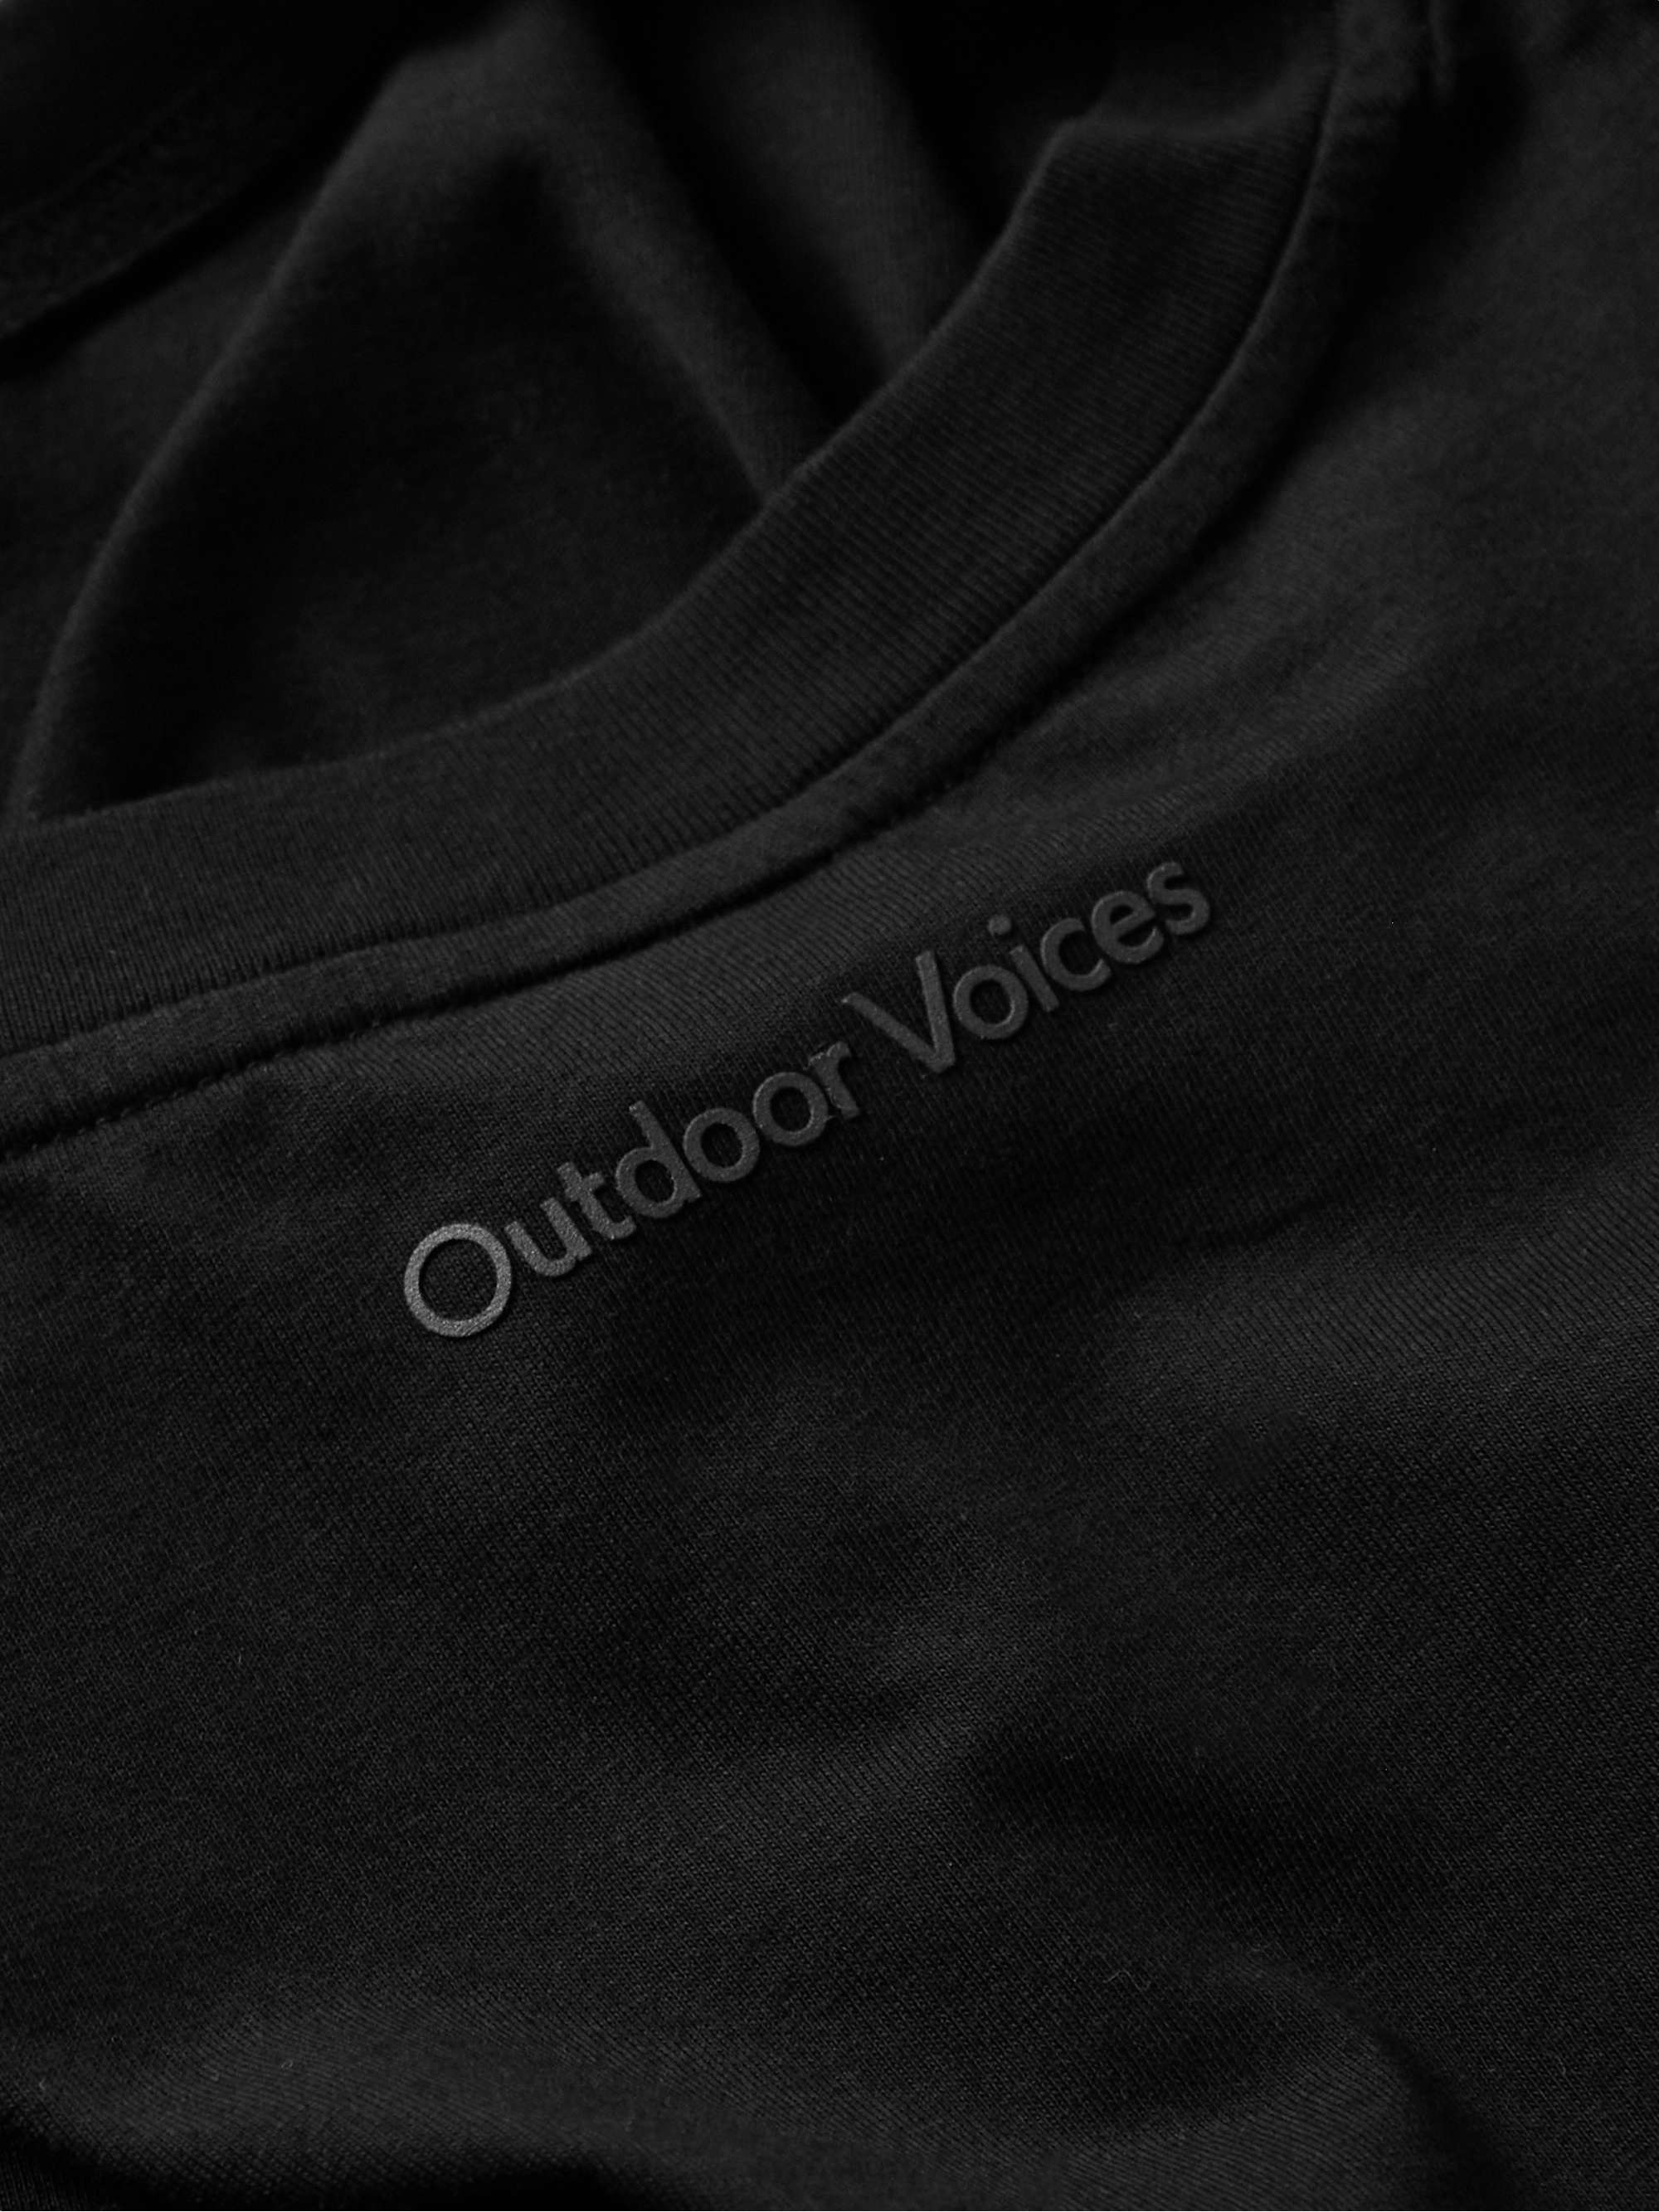 OUTDOOR VOICES 